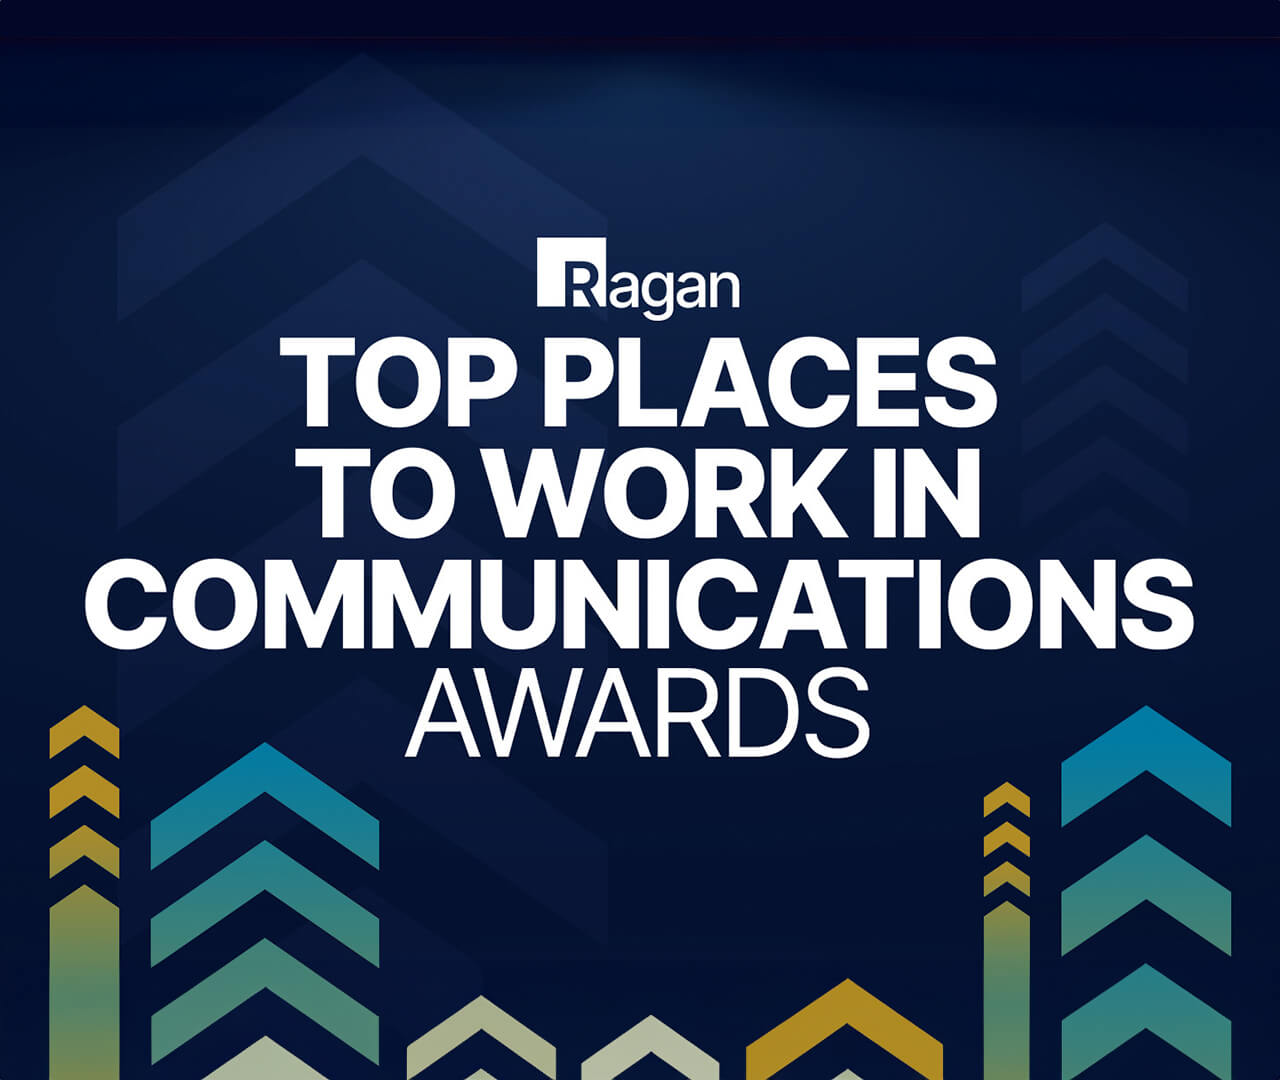 Coyne Public Relations Celebrates Second Consecutive Win as one of the Top Places to Work in Communications by Ragan